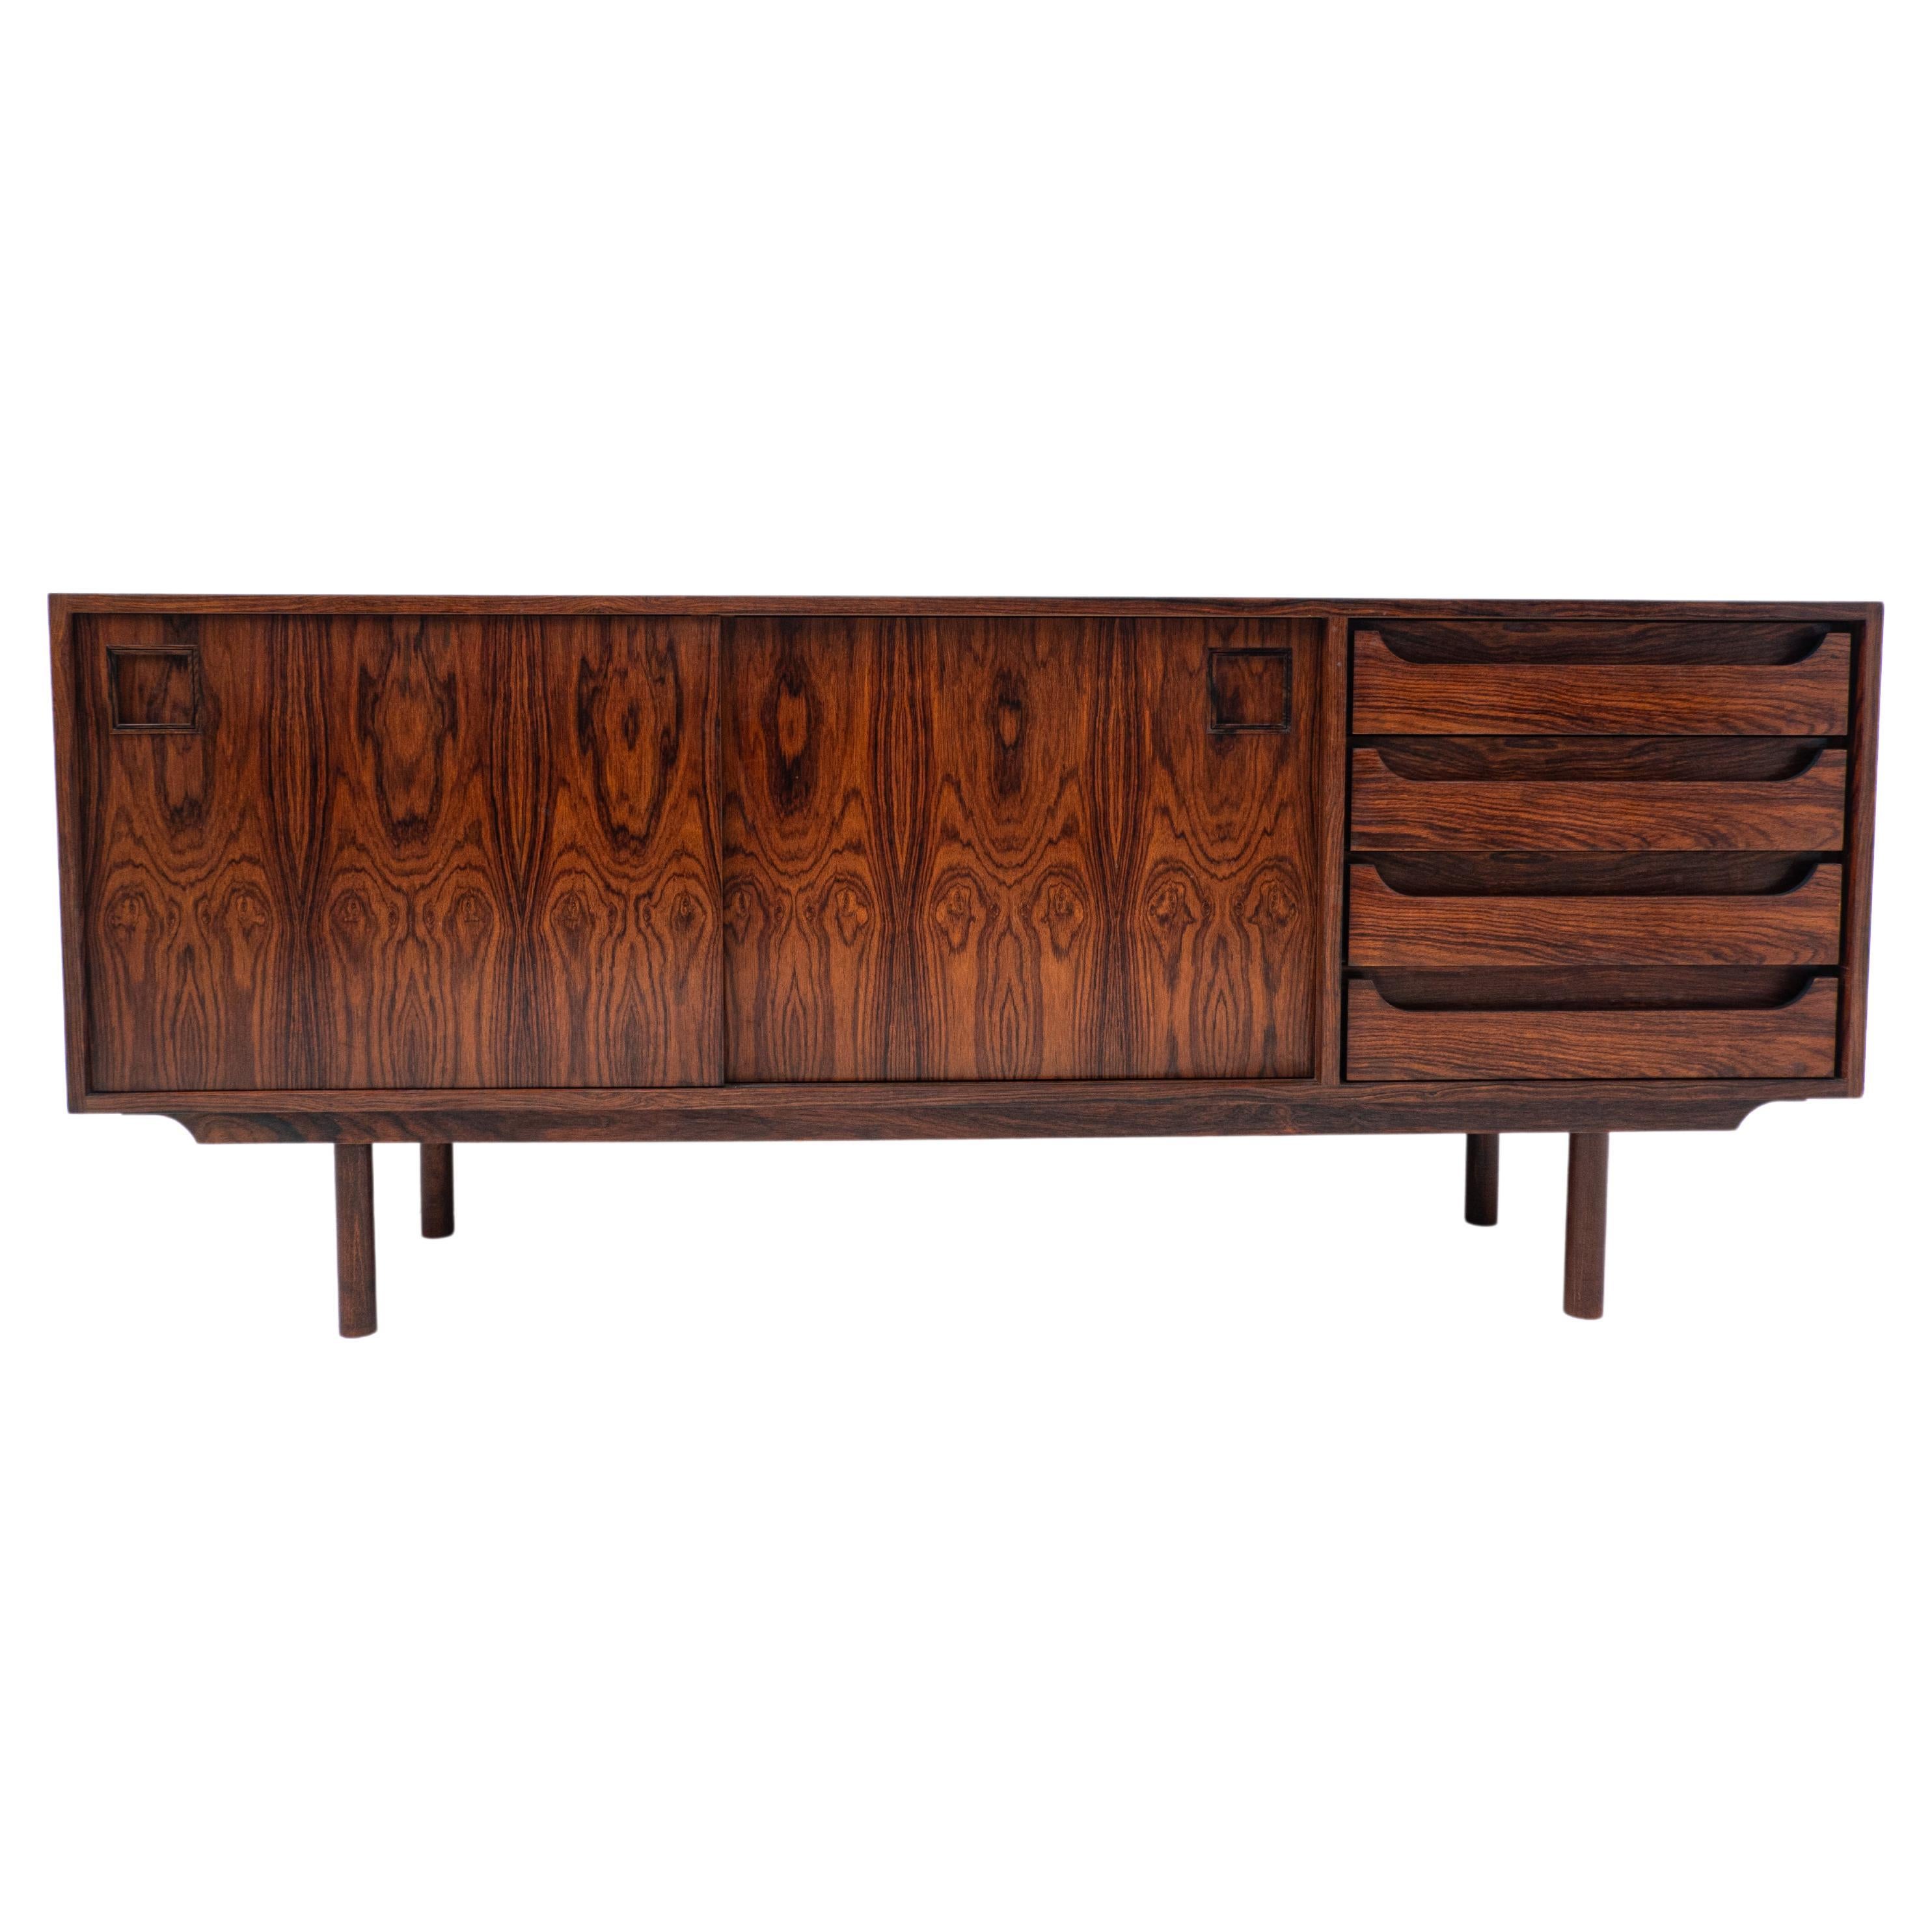 Mid-Century Modern Wooden Sideboard with Drawers and Sliding Doors, Italy 1970s